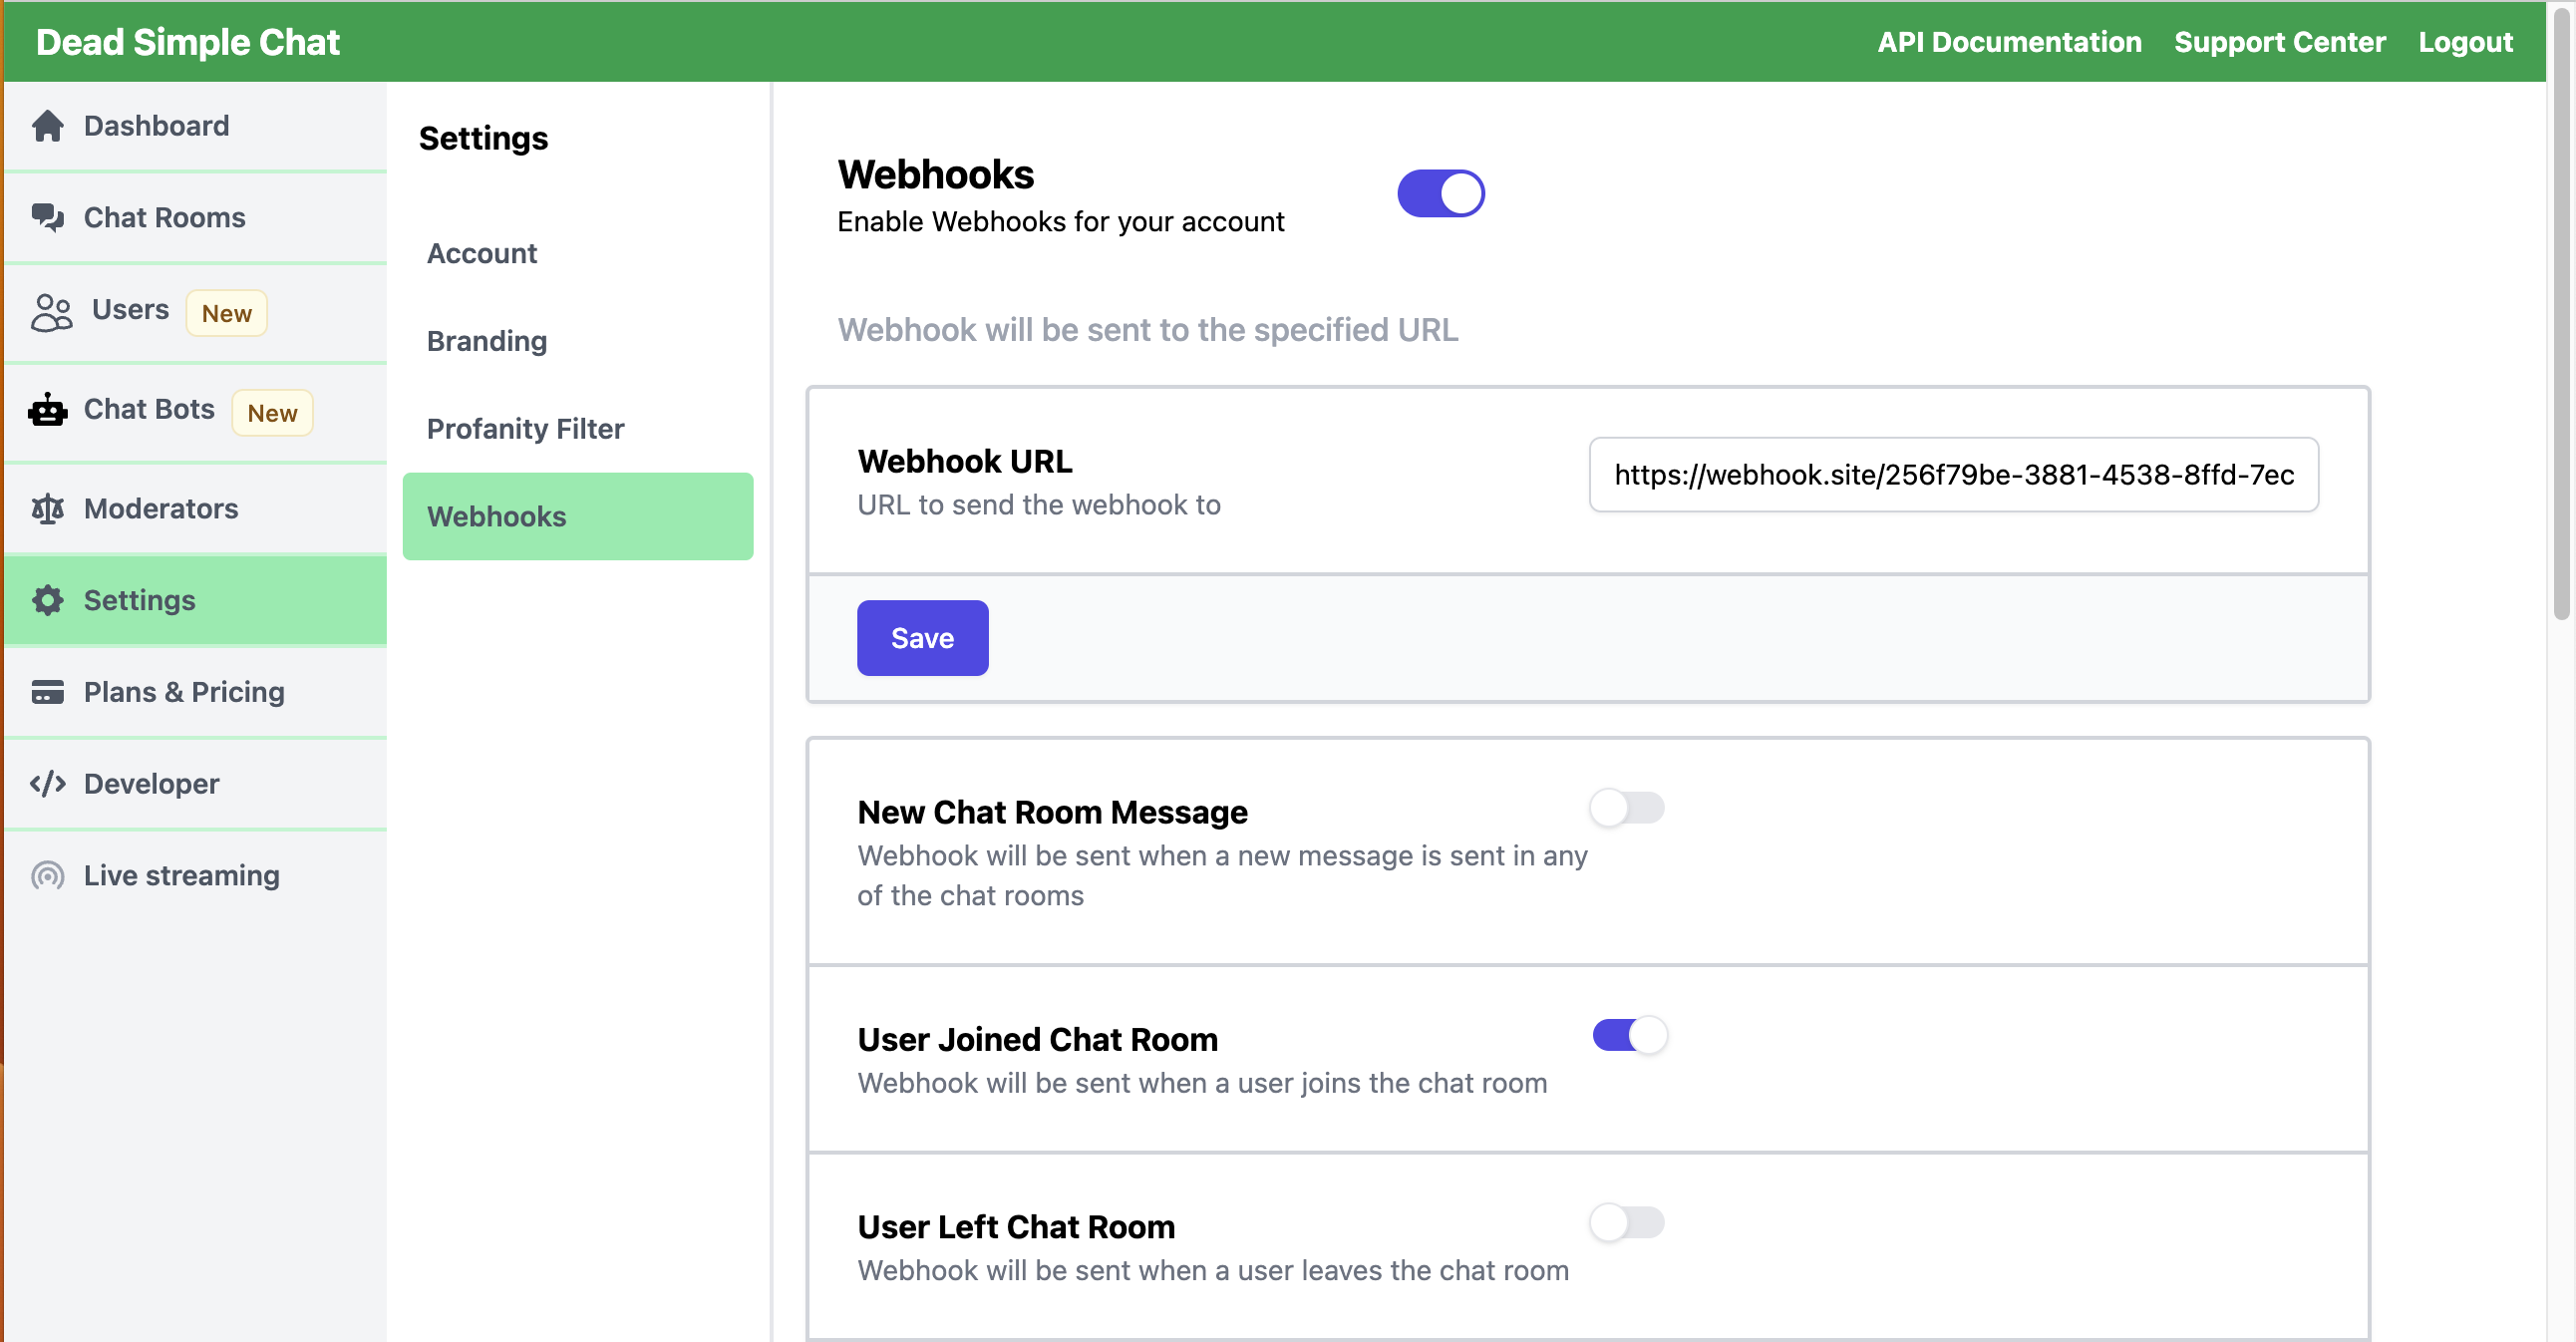 Setting up User Joined Chat Room Webhook